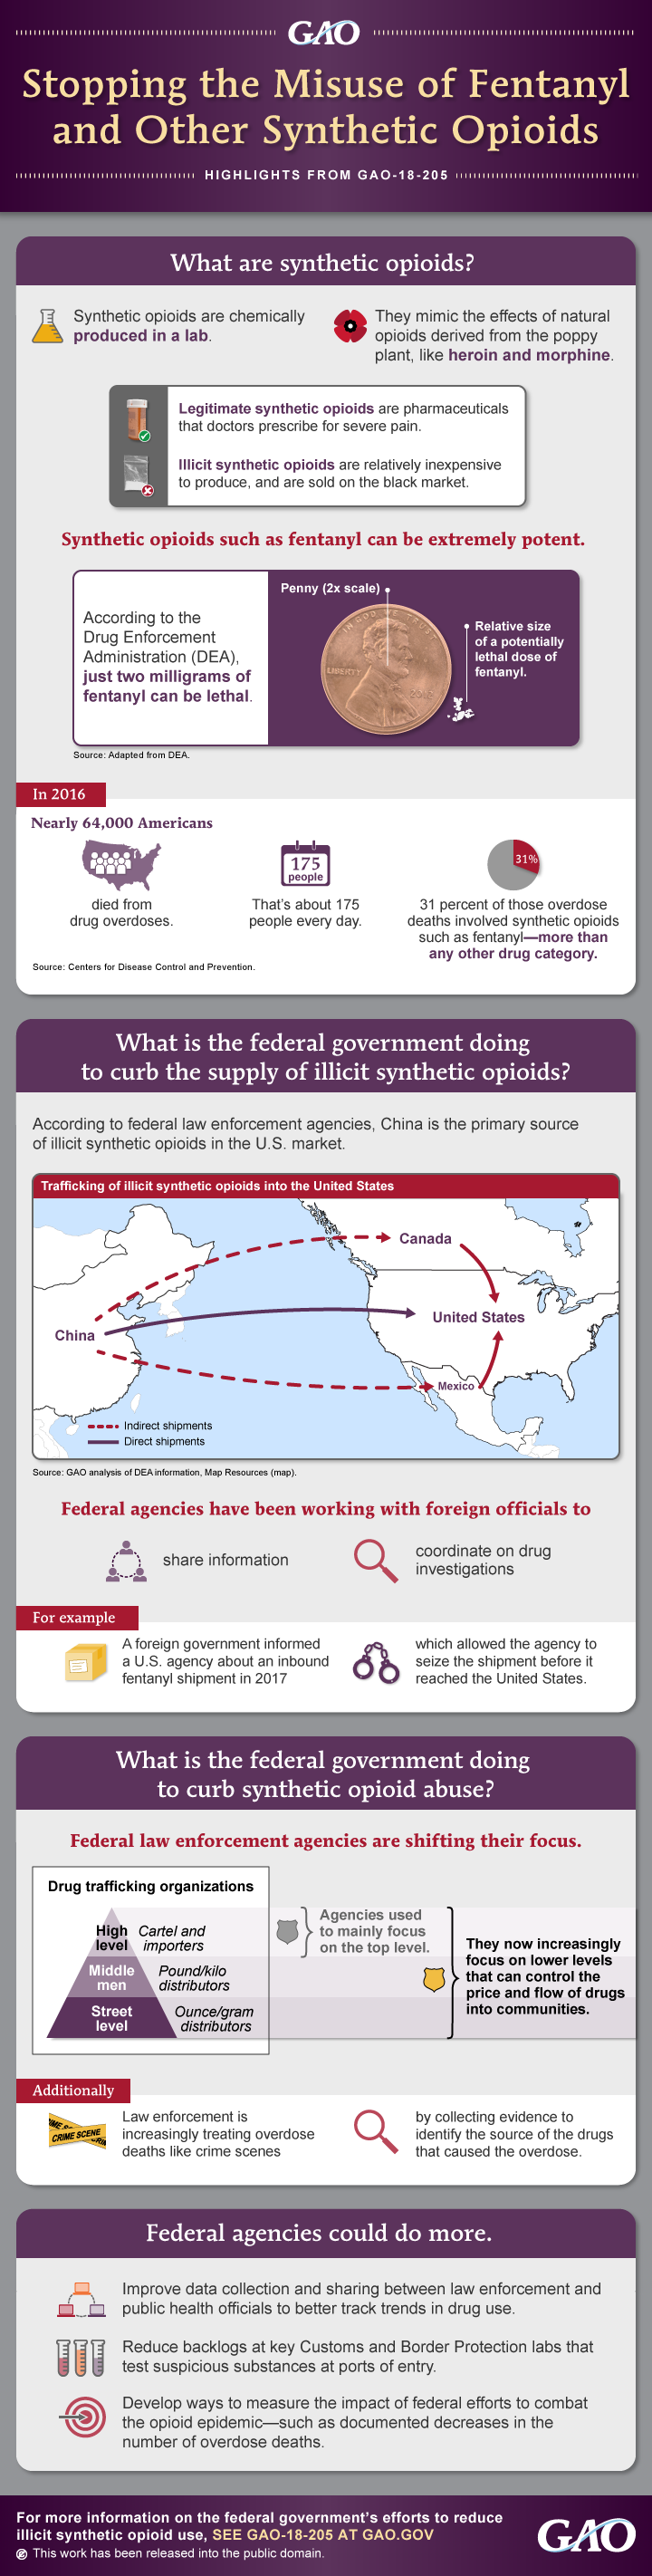 Stopping the Misuse of Fentanyl and Other Synthetic Opioids.